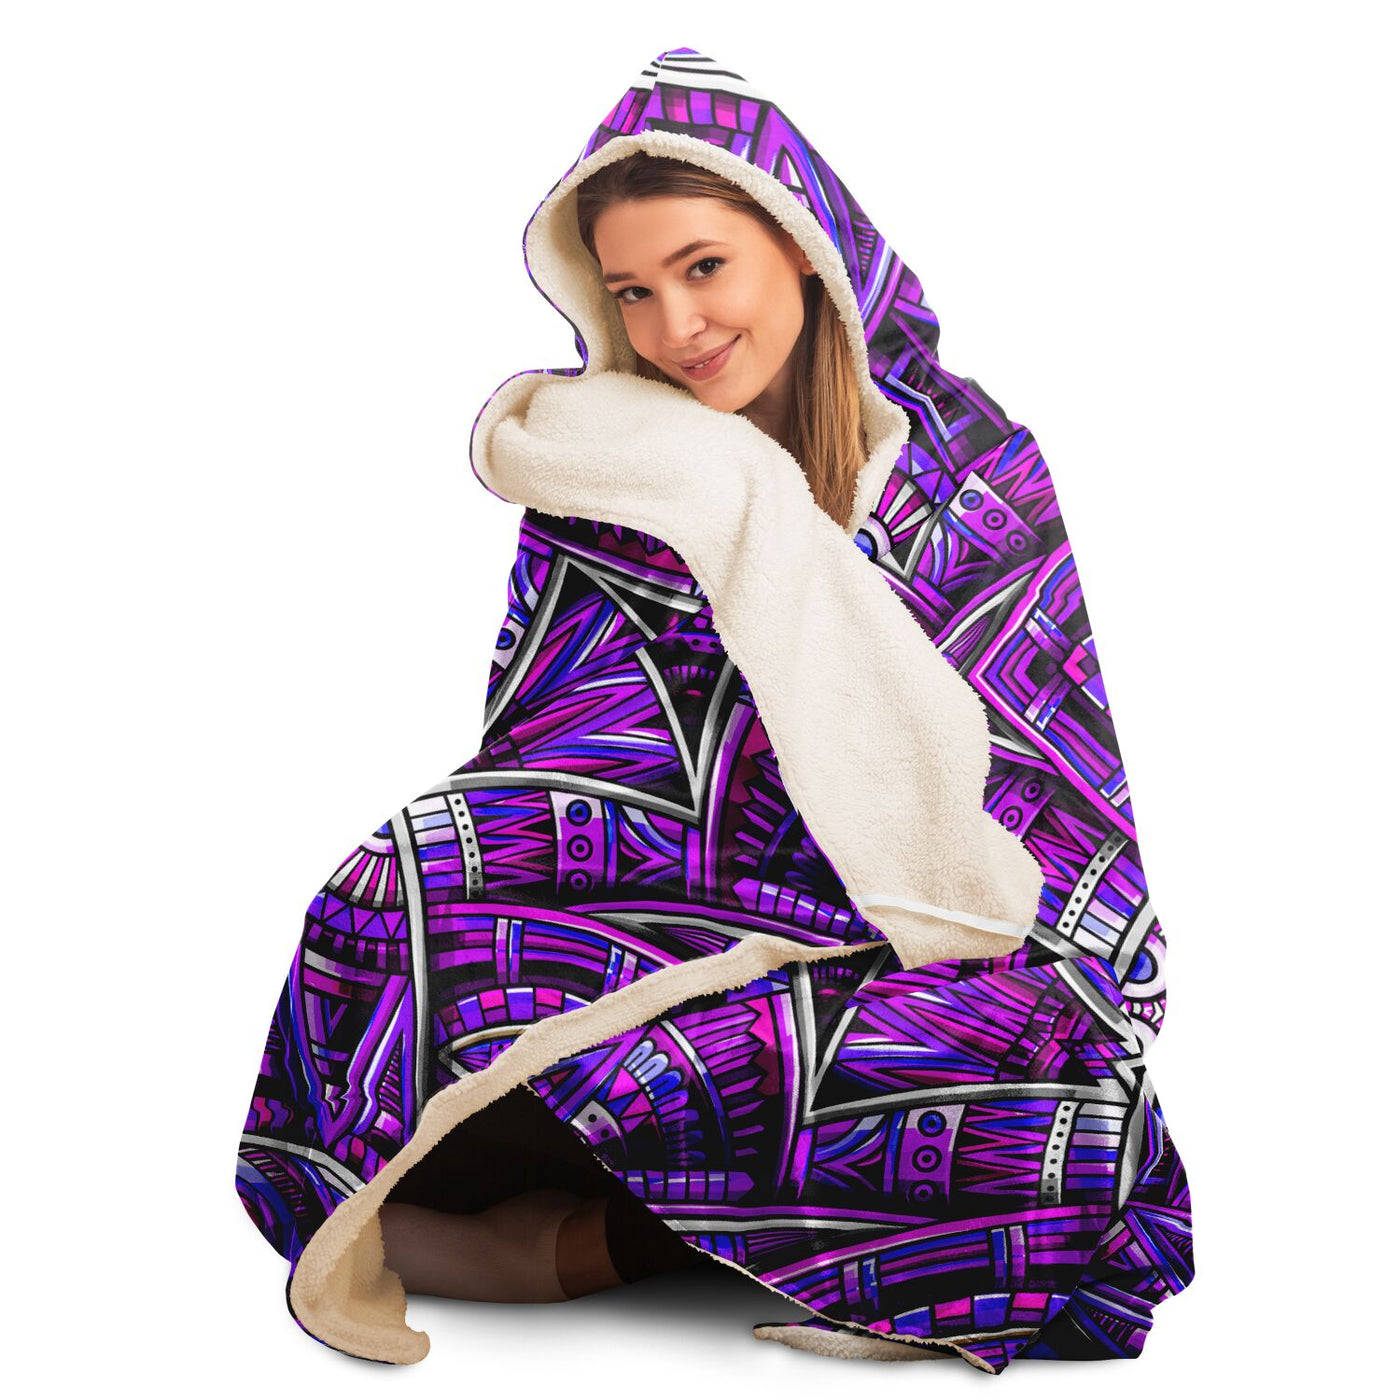 Thistle Festival Clothes Tribal Lines 16 | Hooded Blanket